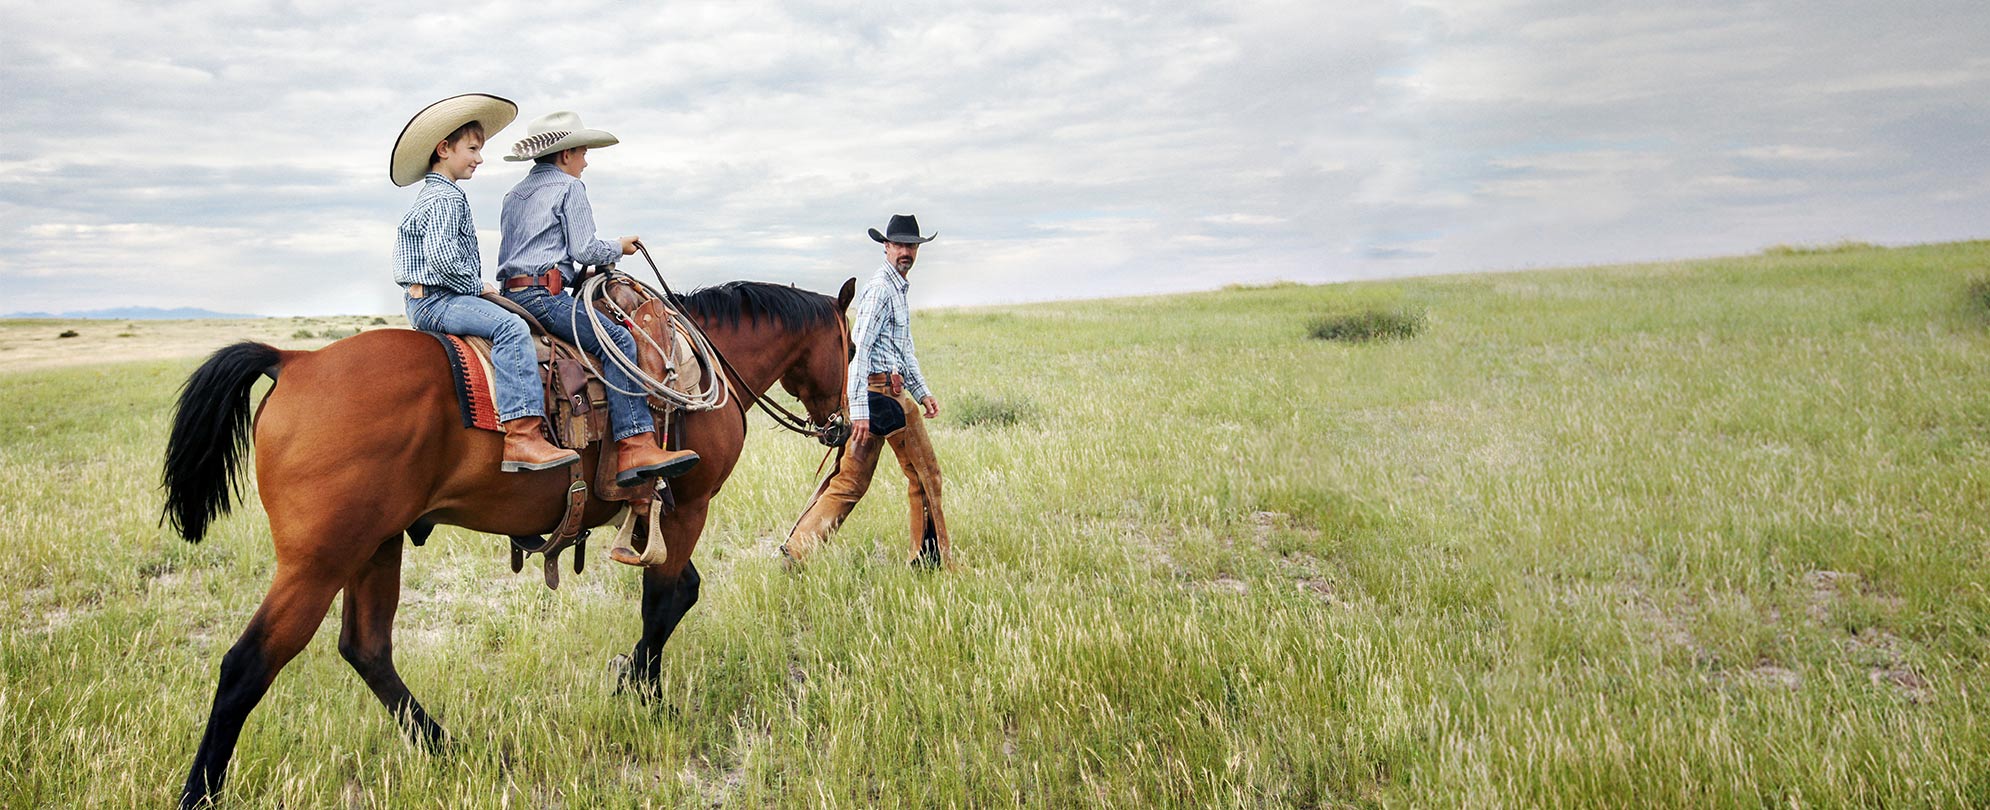 Two boys dressed in in jeans, flannel shirts, boots, and cowboy hats ride on a brown horse as a man in cowboy attire walks in front of them through  a grassy field.